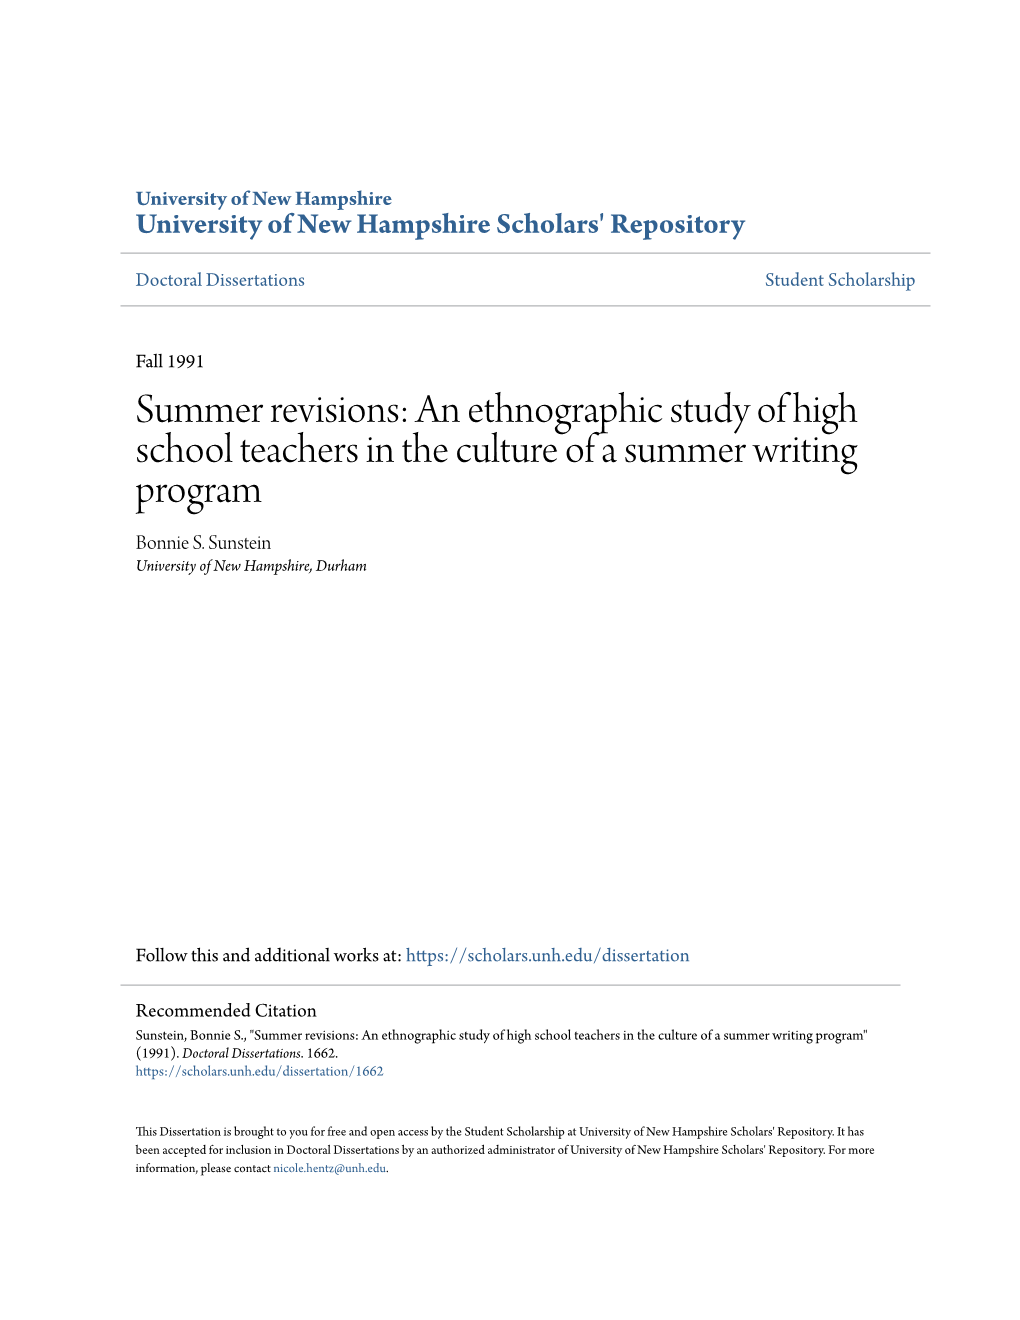 An Ethnographic Study of High School Teachers in the Culture of a Summer Writing Program Bonnie S